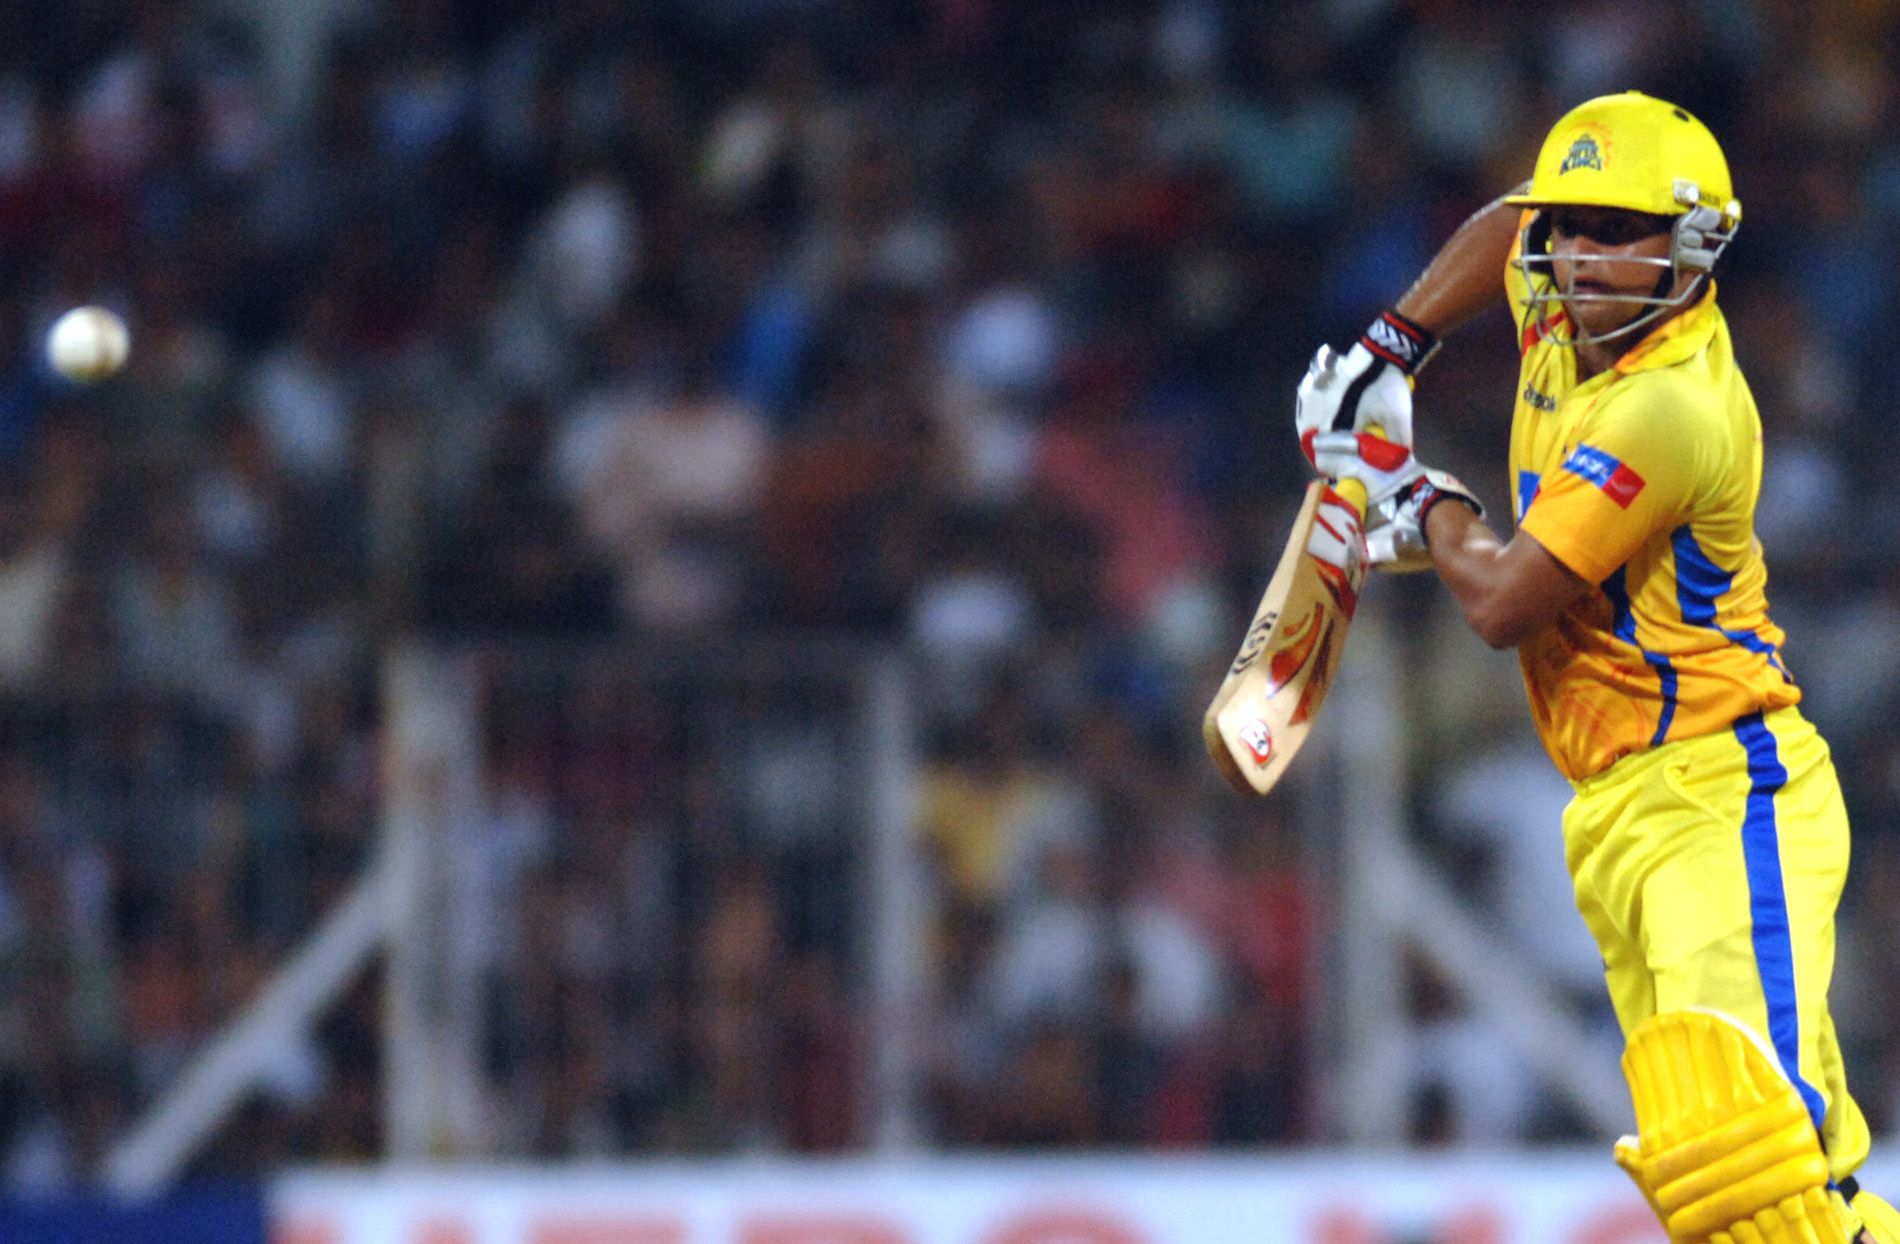 Suresh Raina of “Chennai Super Kings played a shot during the DLF Indian Premier League T20 2nd Semi Final Match with “Kings XI Punjab” at Wankhede Stadium in Mumbai on May 31, 2008.